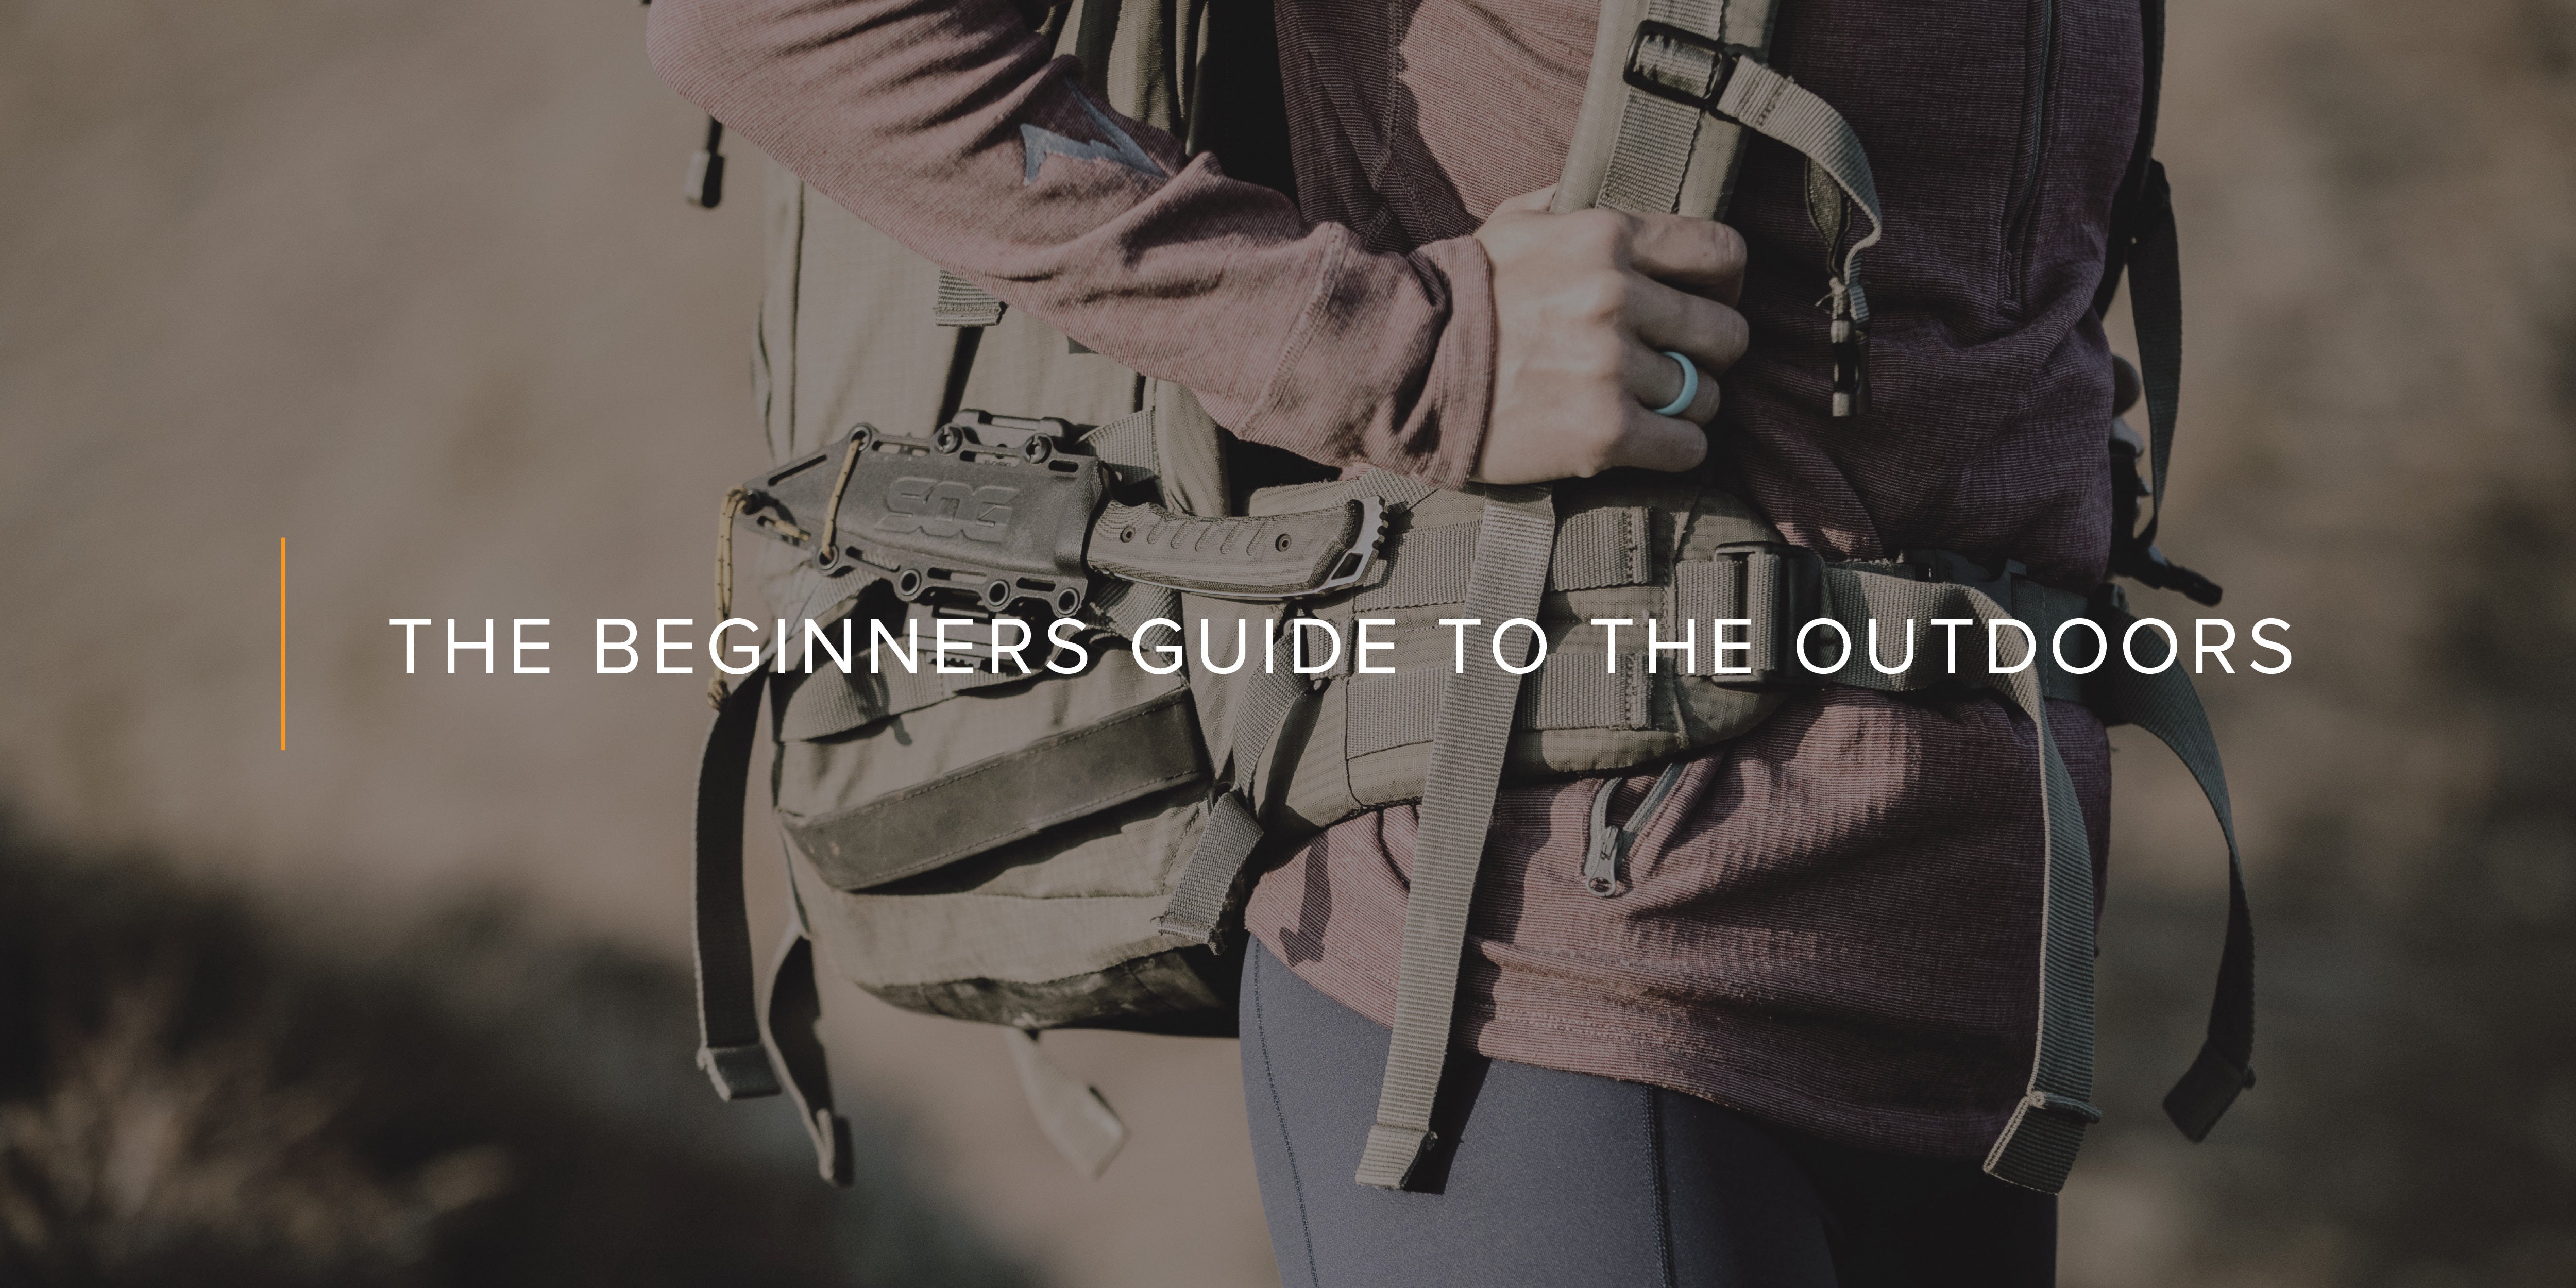 The beginners guide to the outdoors